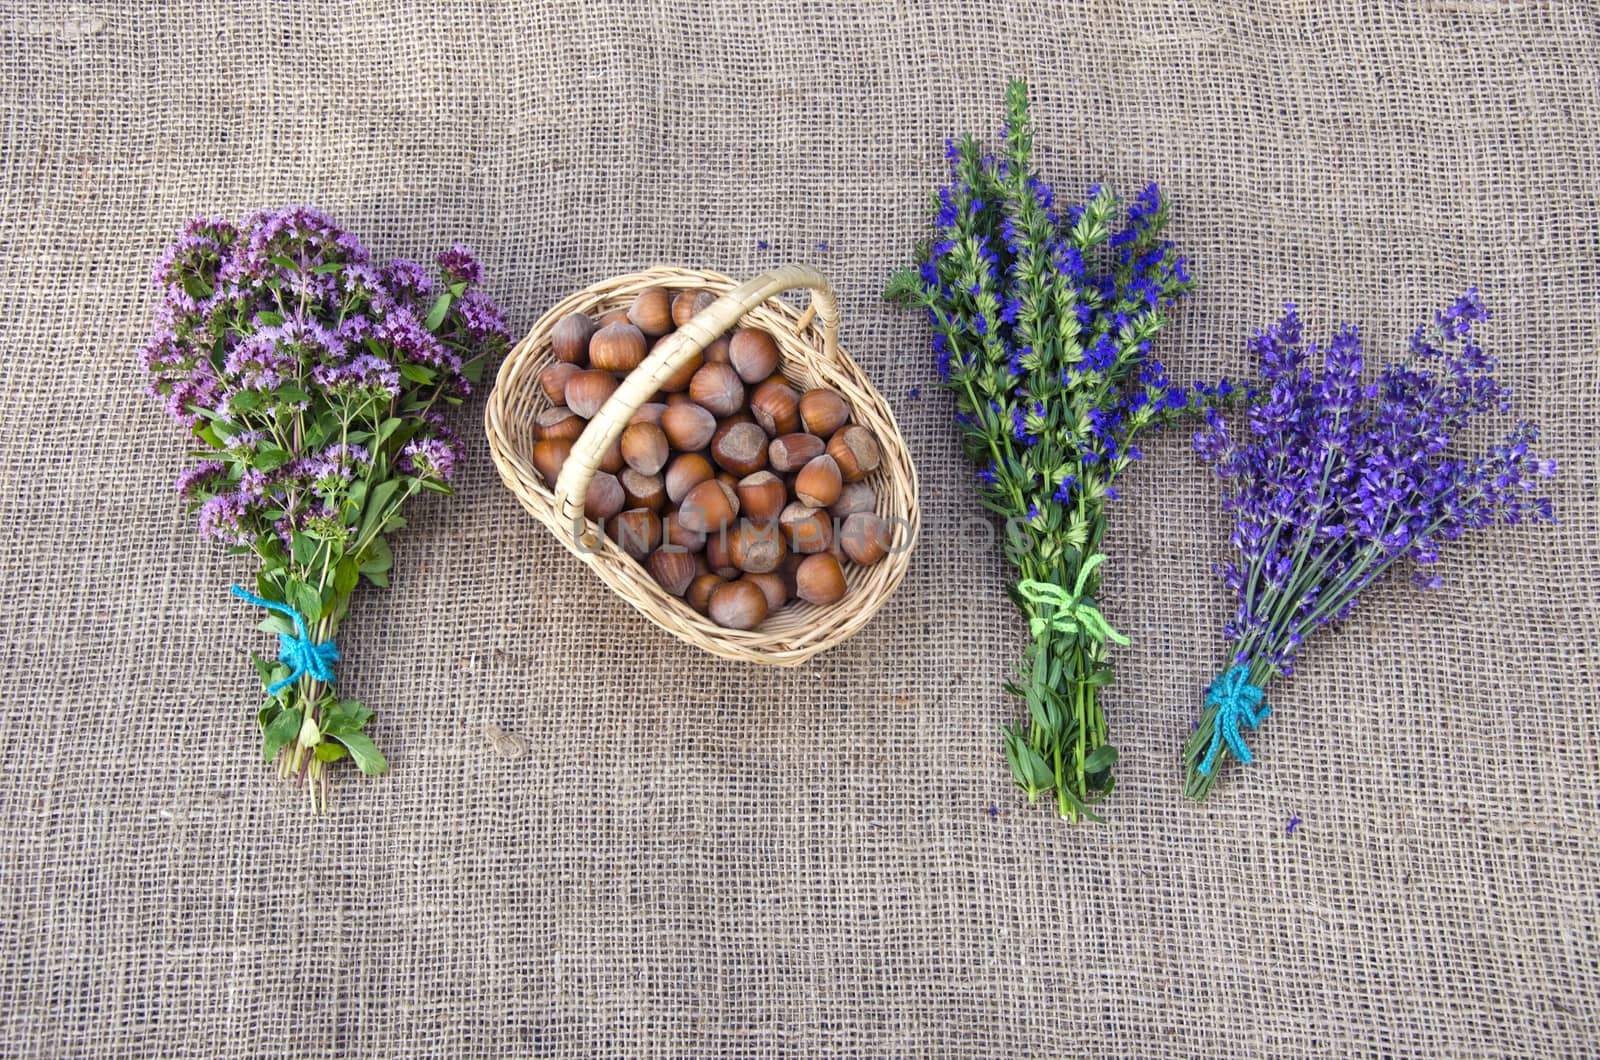 Selection of medical herbs and hazelnuts on linen background